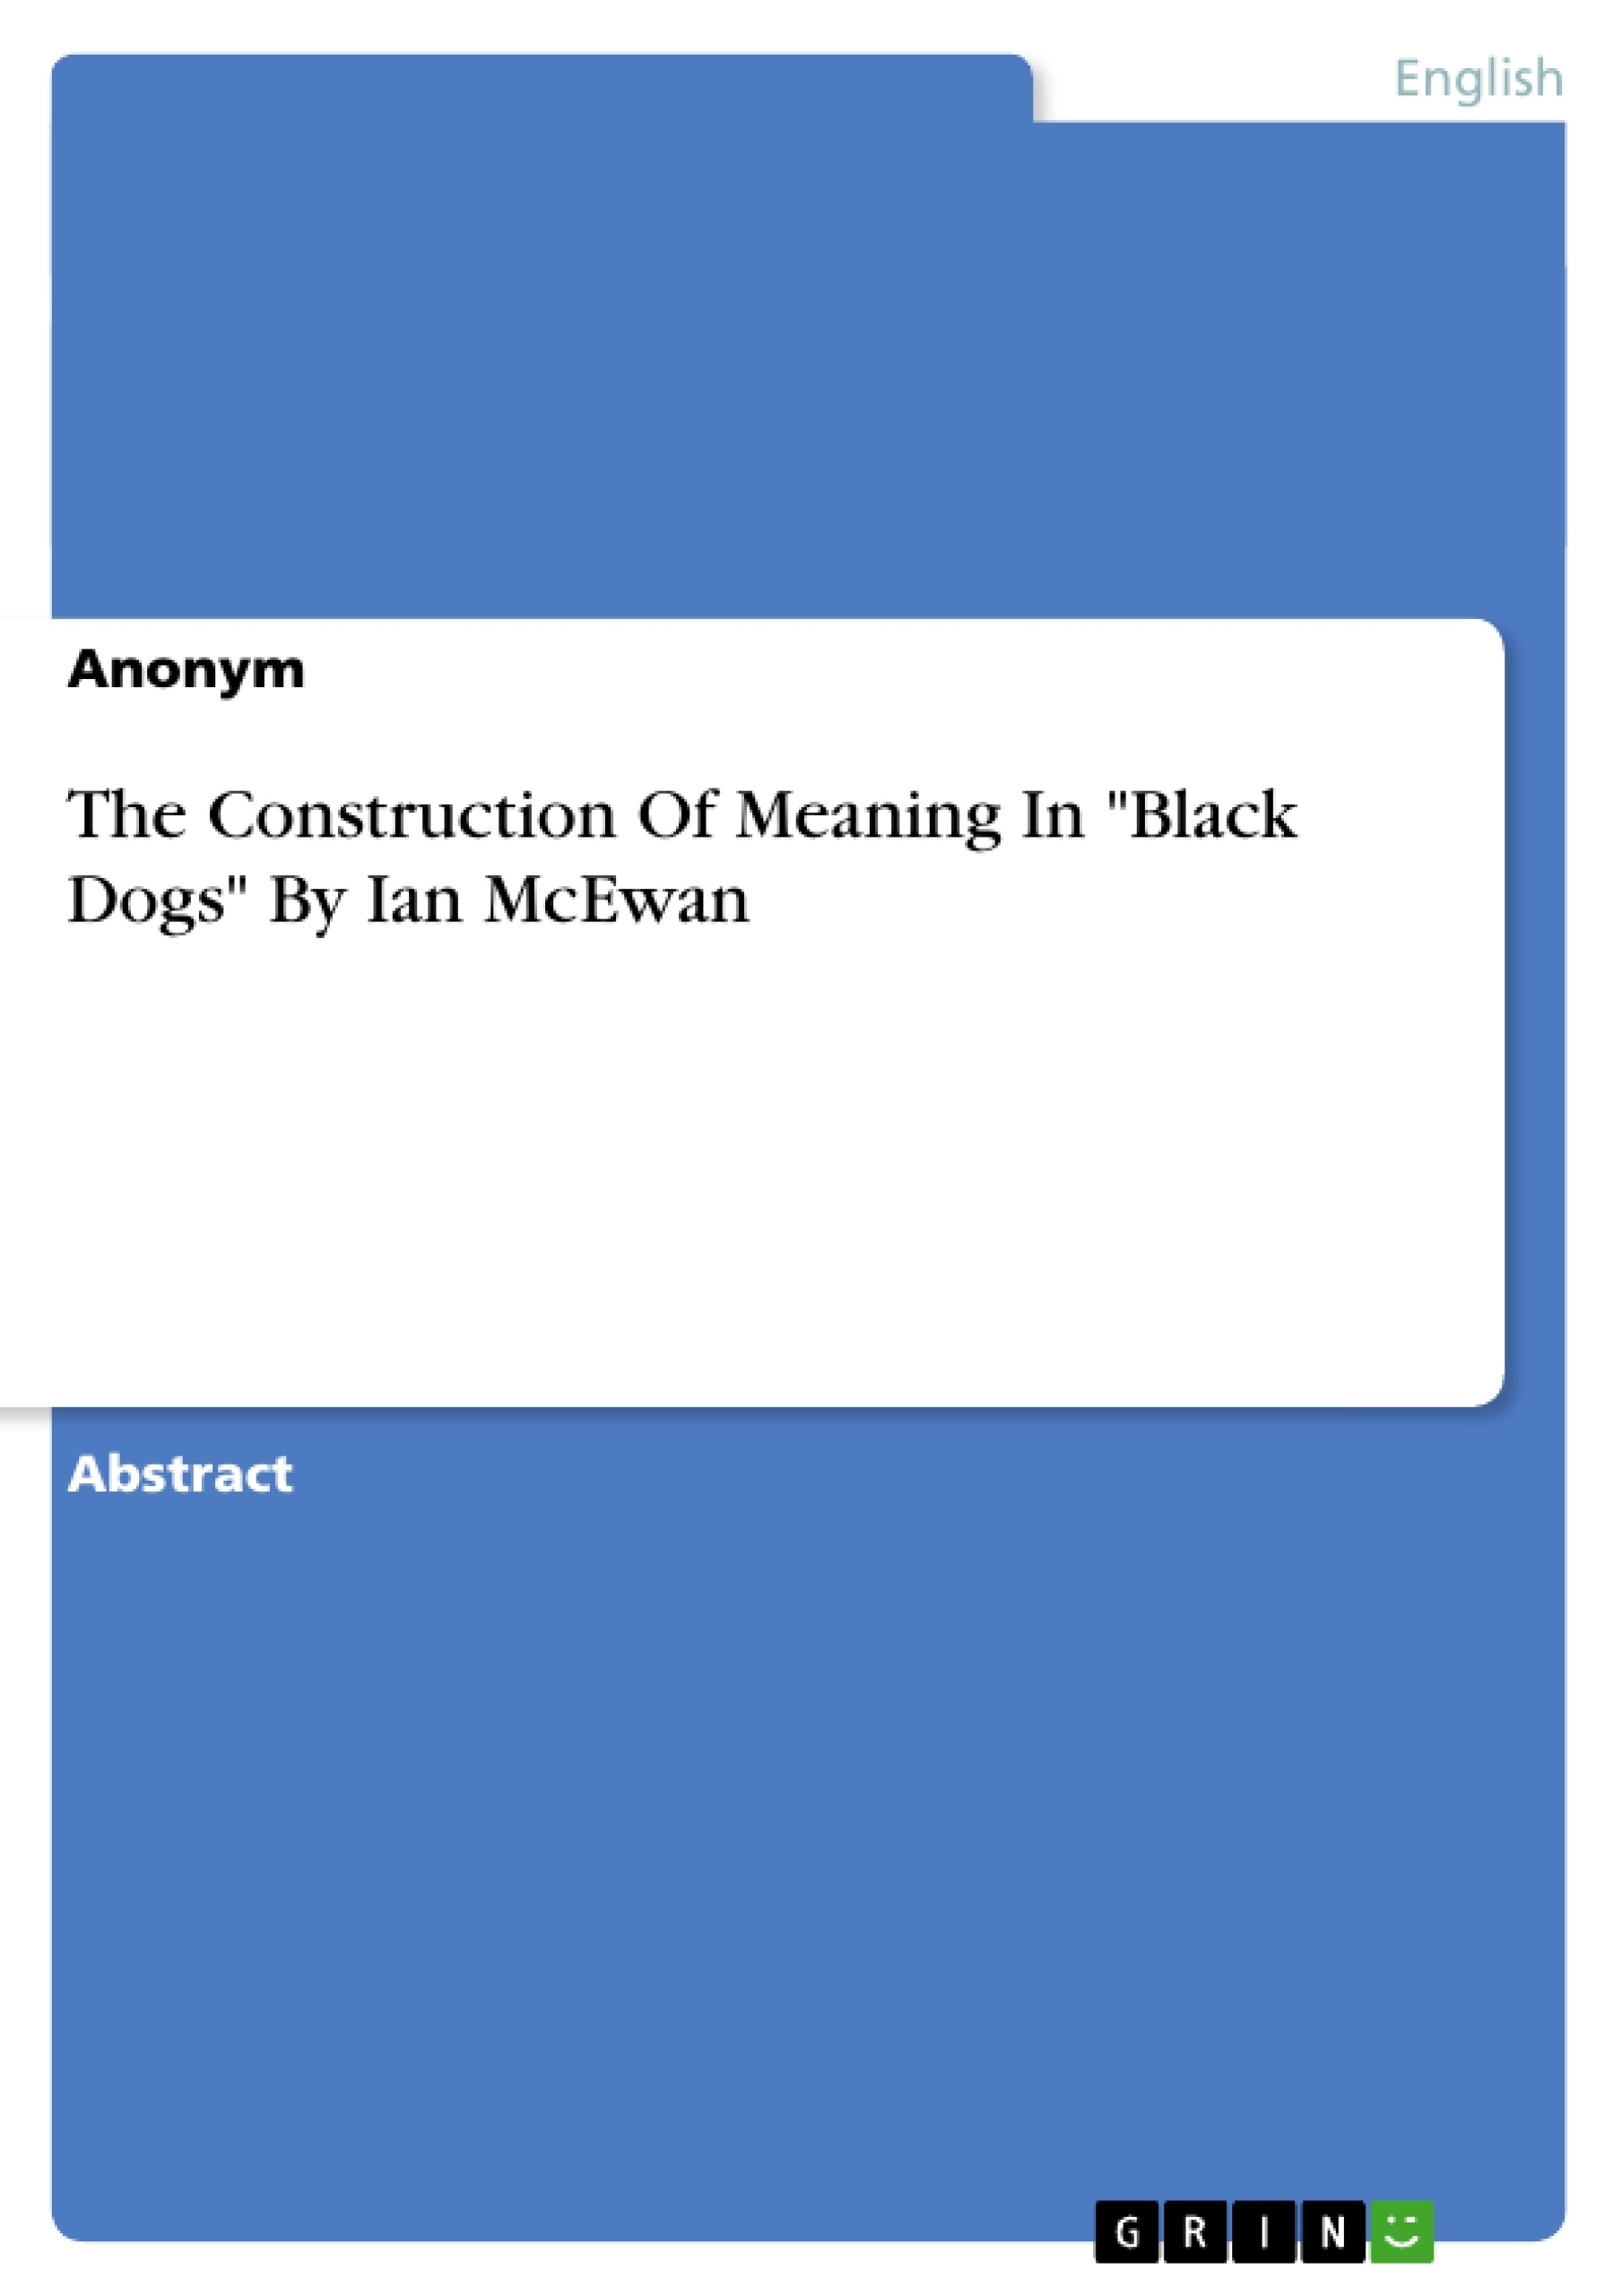 Titel: The Construction Of Meaning In "Black Dogs" By
Ian McEwan